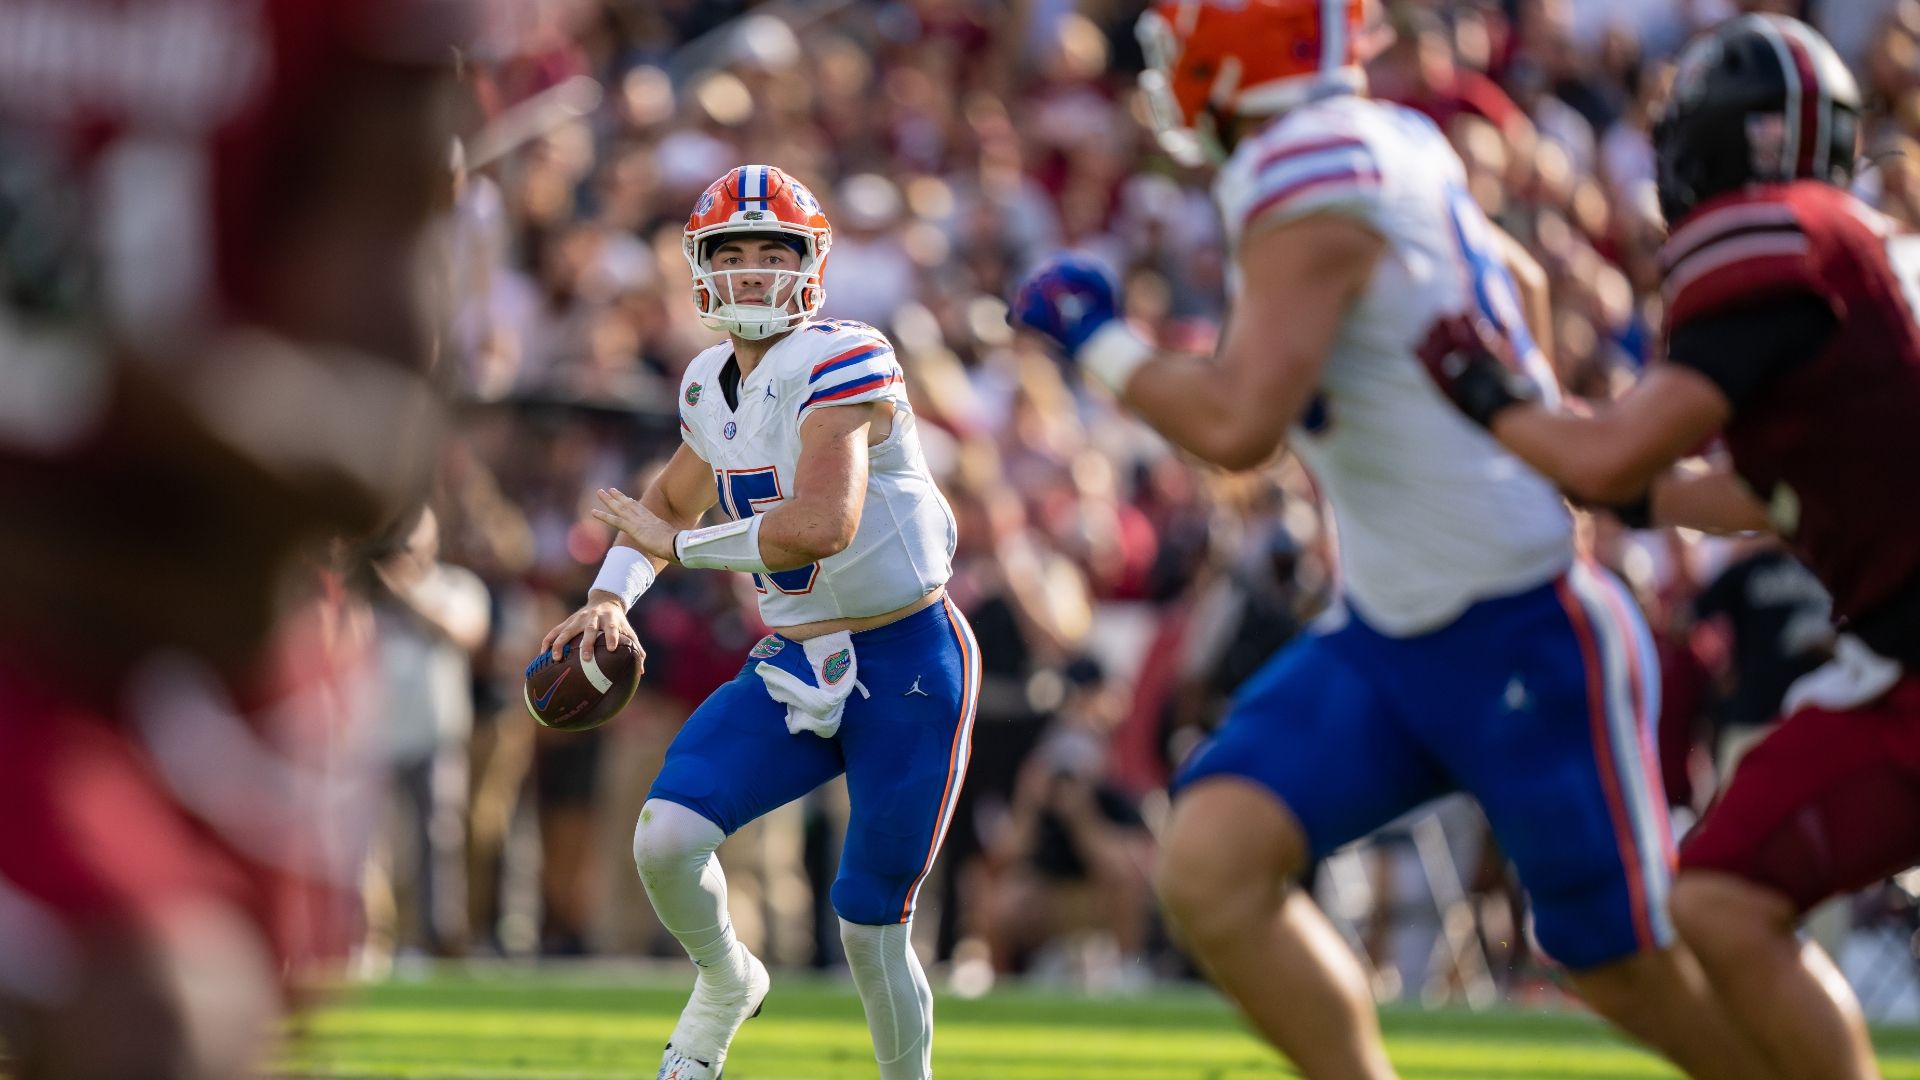 Gators prevail over Gamecocks with last-minute TD